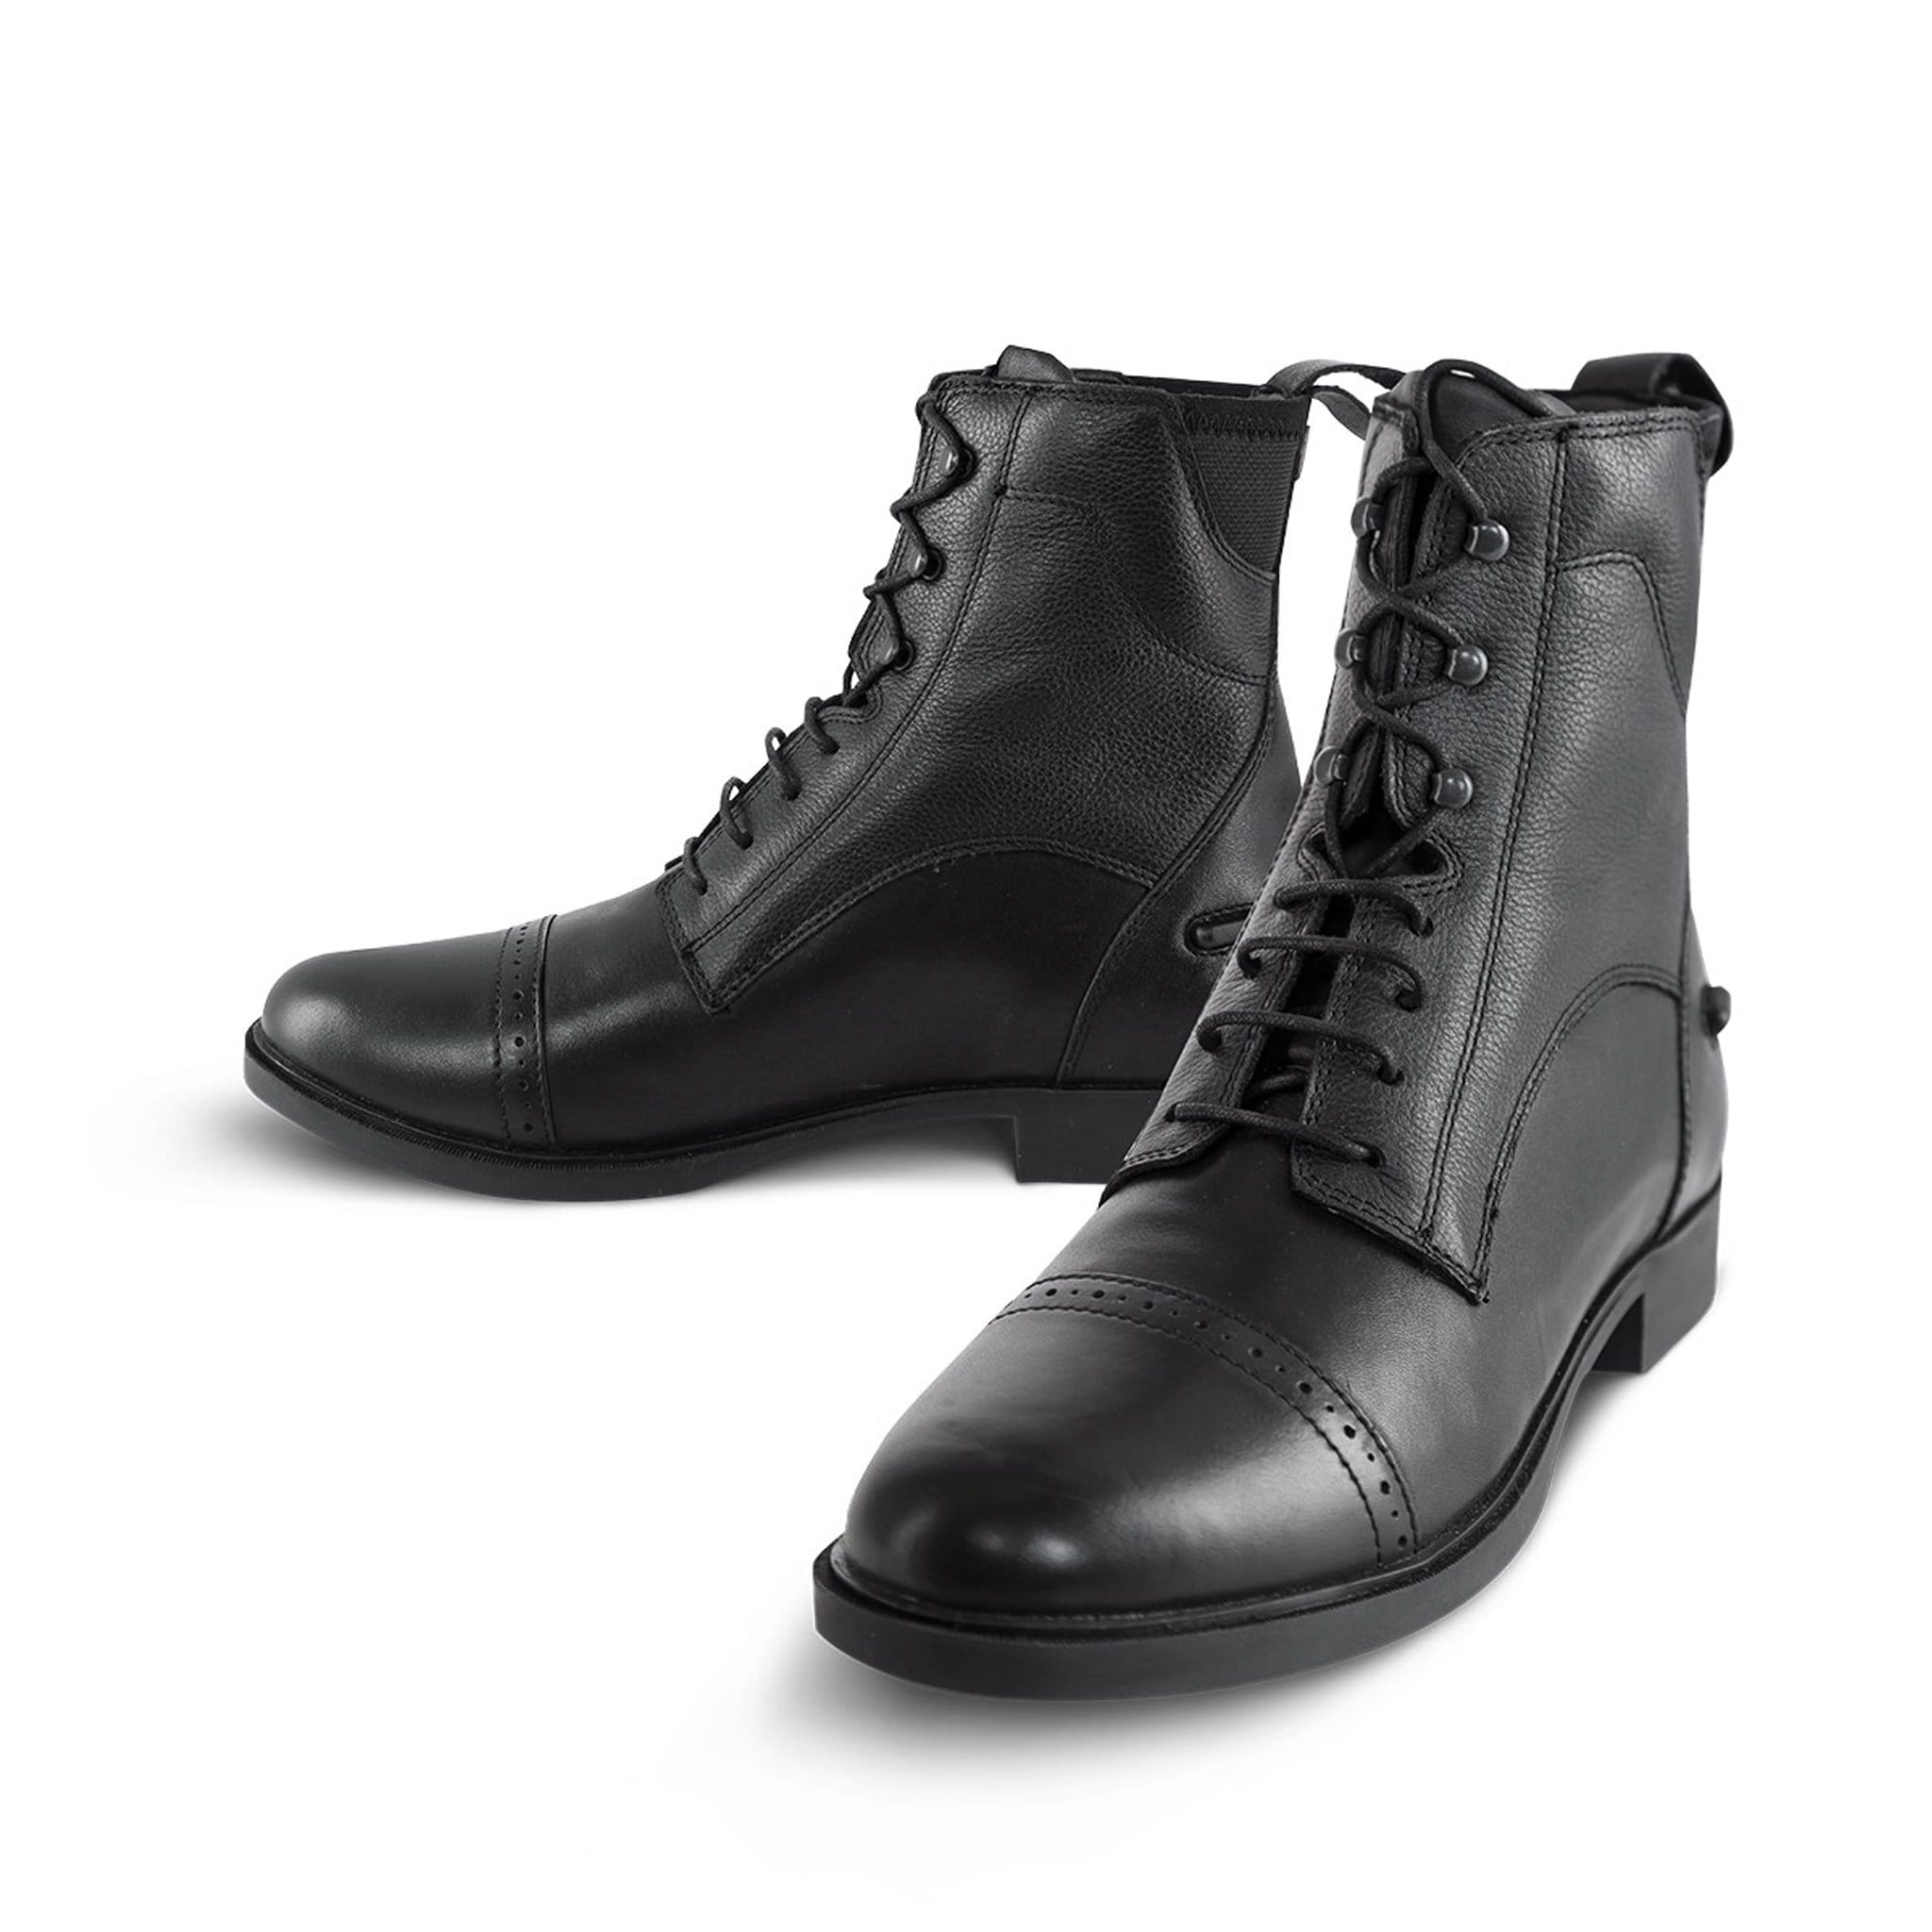 Tredstep Giotto II Lace Up Paddock Boots